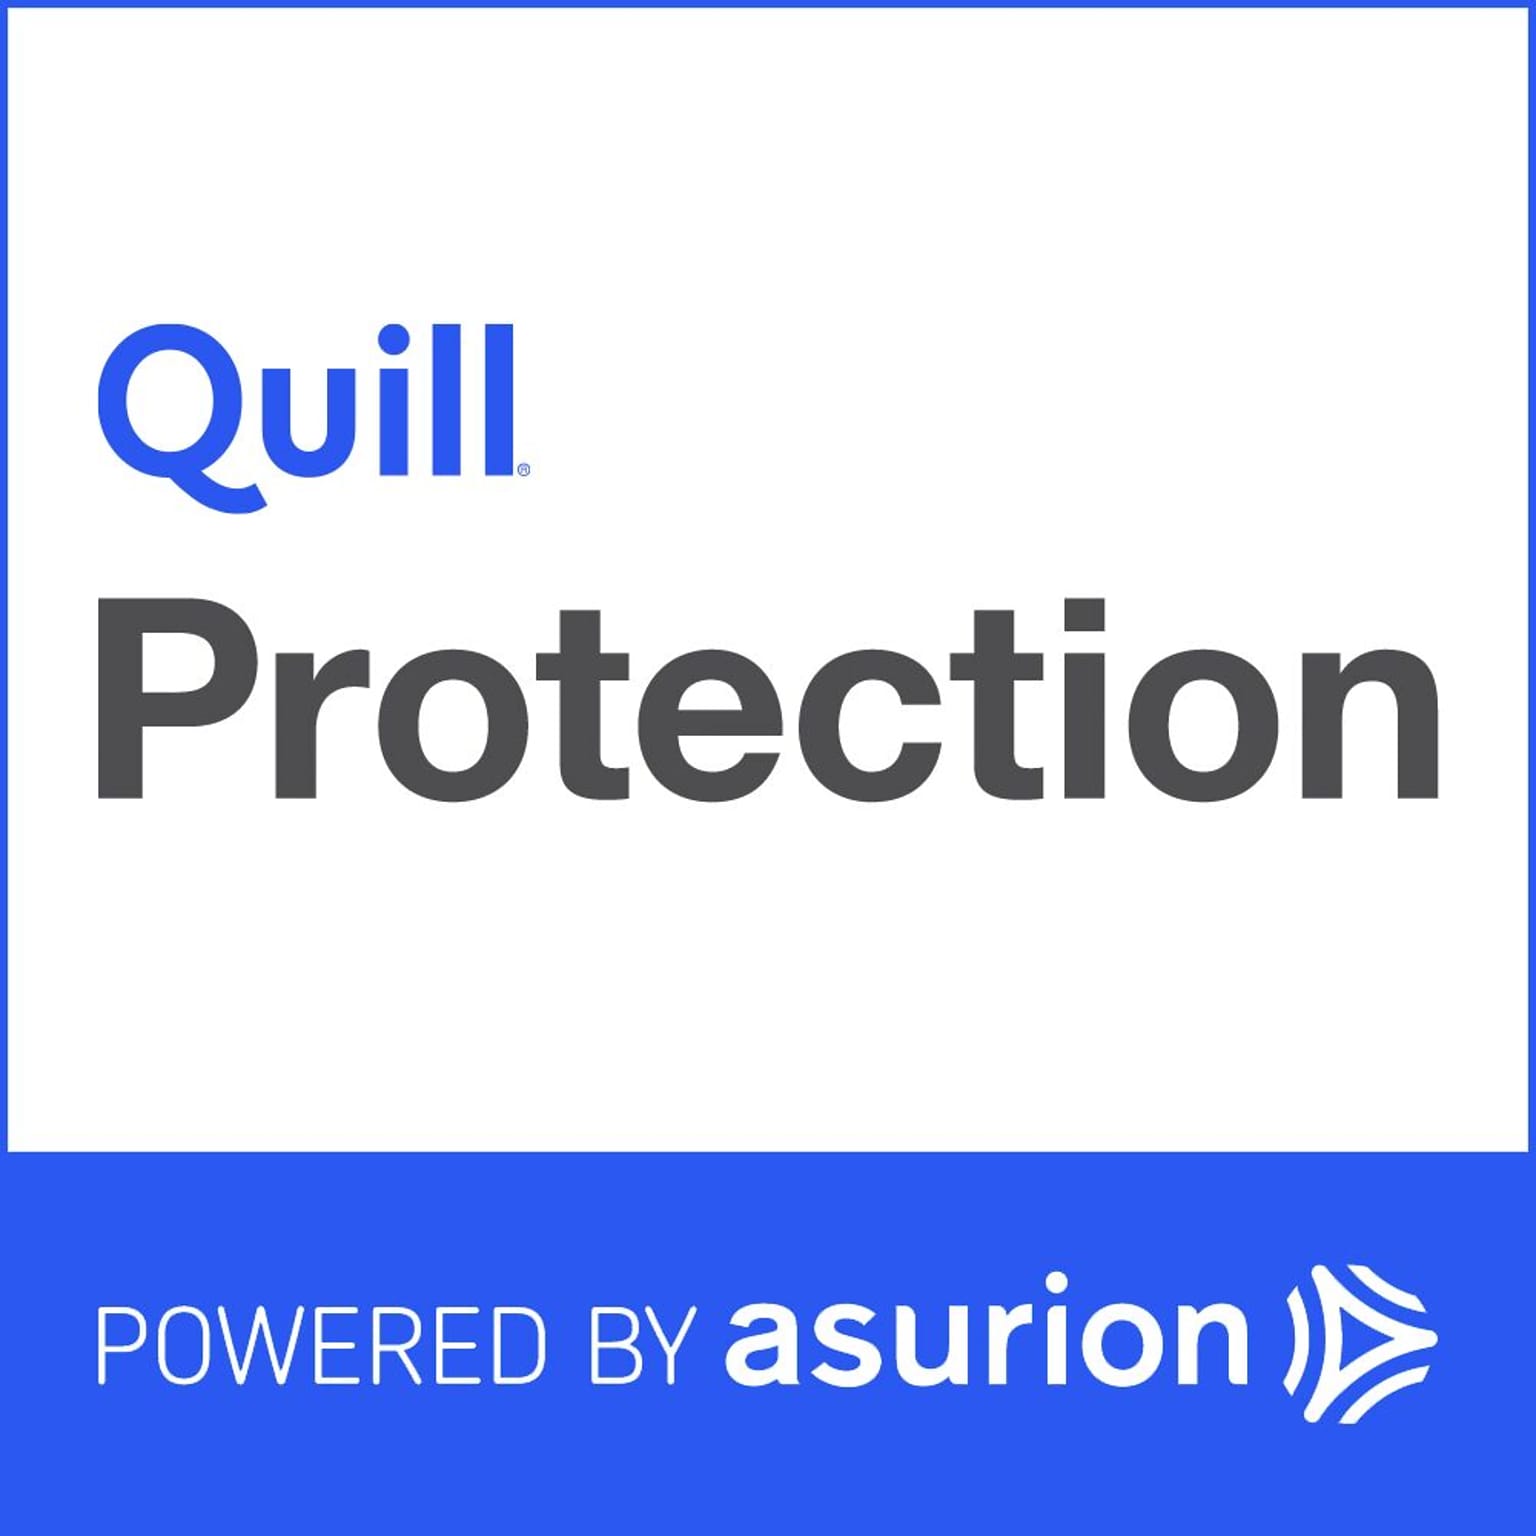 Quill.com 3 Year Protection Plan $100-$199.99